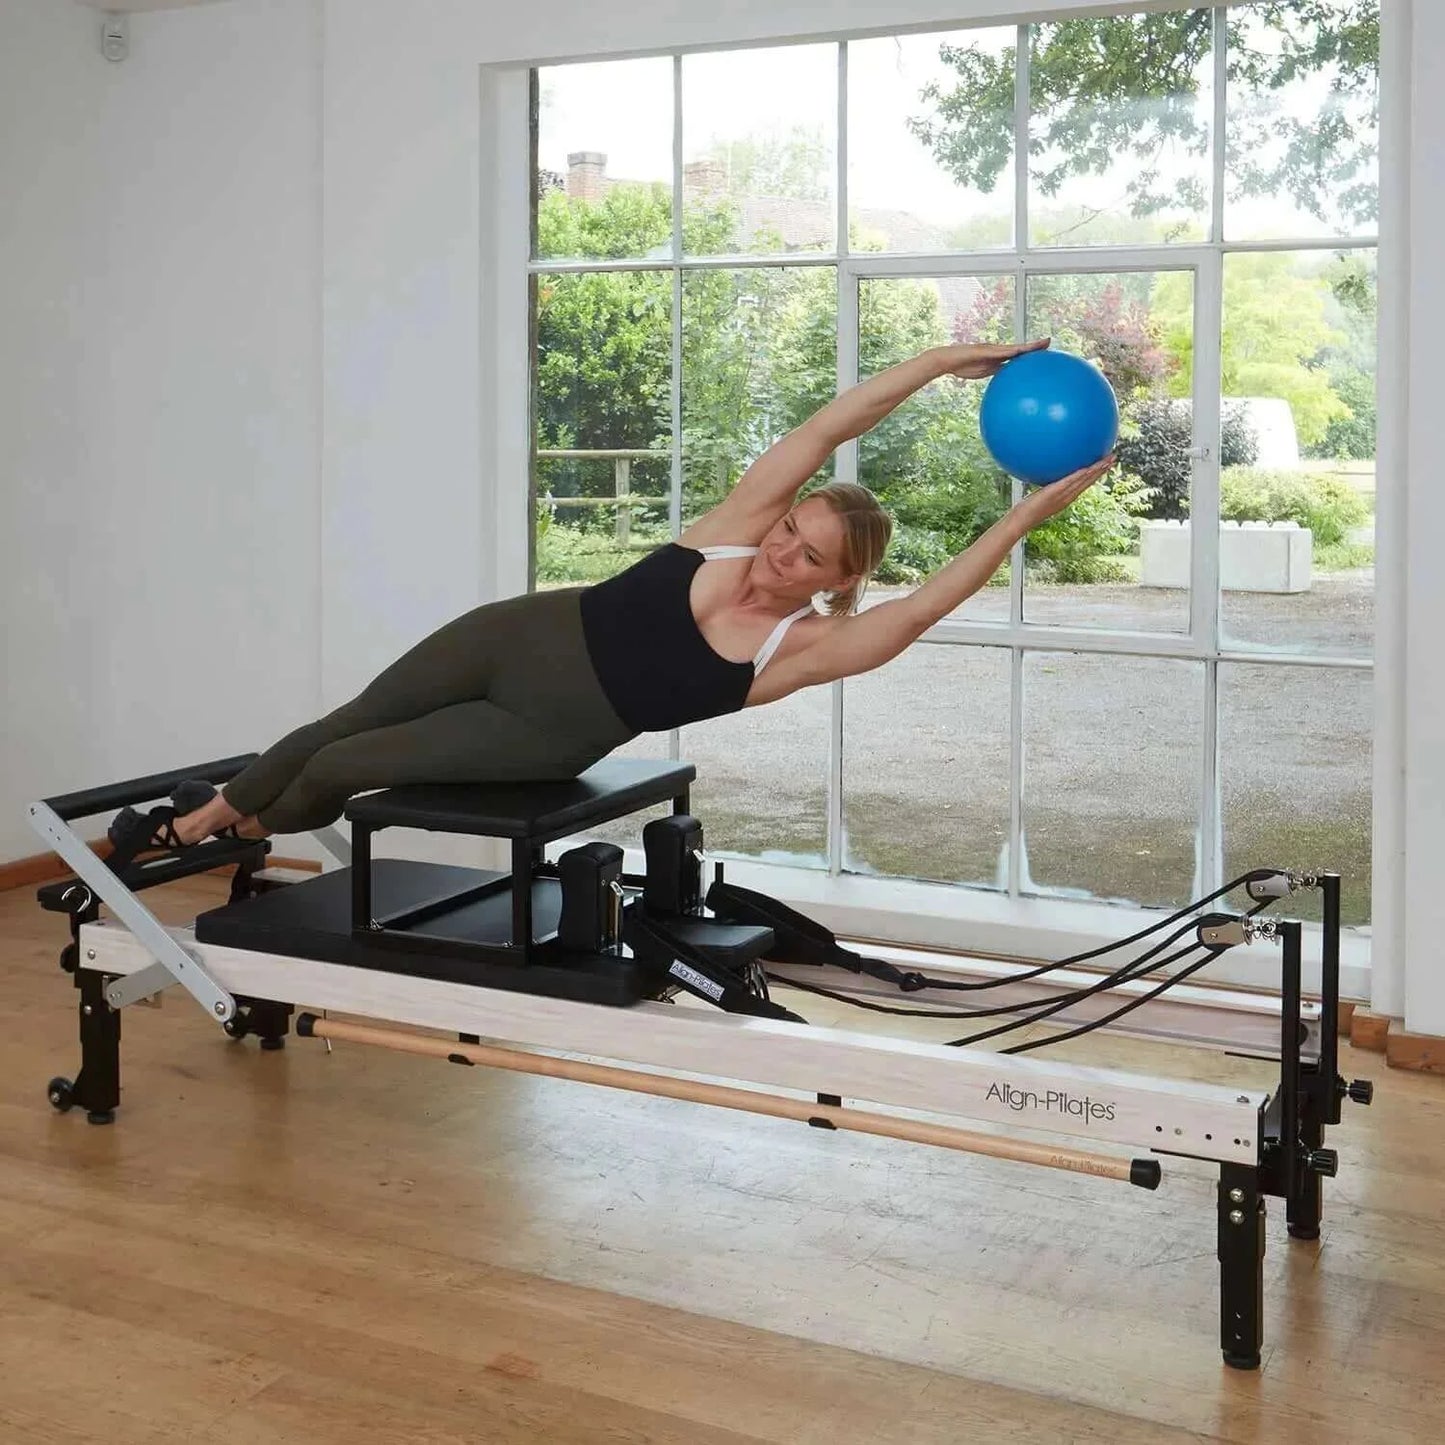  Align Pilates Frame Sitting Box by Align Pilates sold by Pilates Matters® by BSP LLC